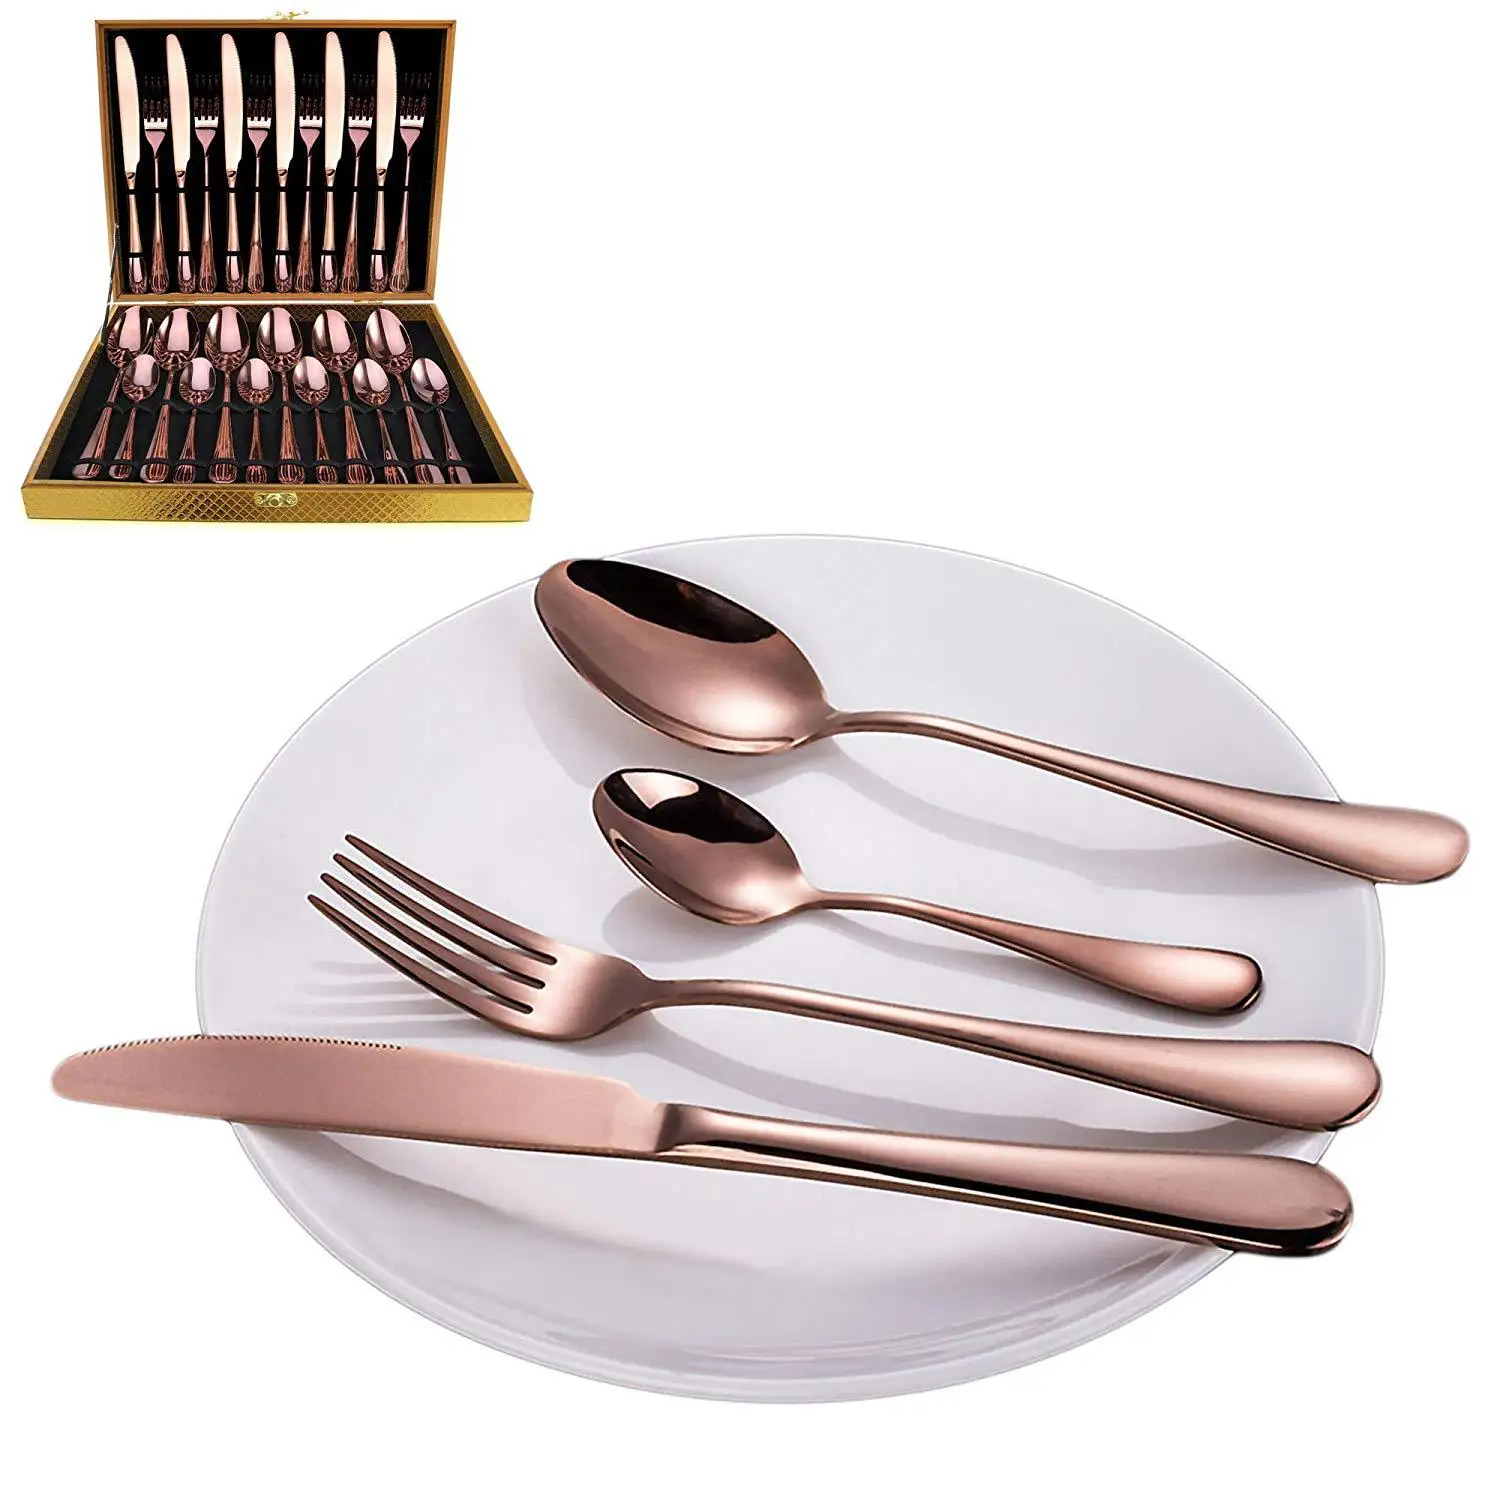 

Amazon Hot Selling Gold Cutlery 24pcs Set Stainless Steel Silverware Serving For 6, Silver/gold/rose gold/colorful/black